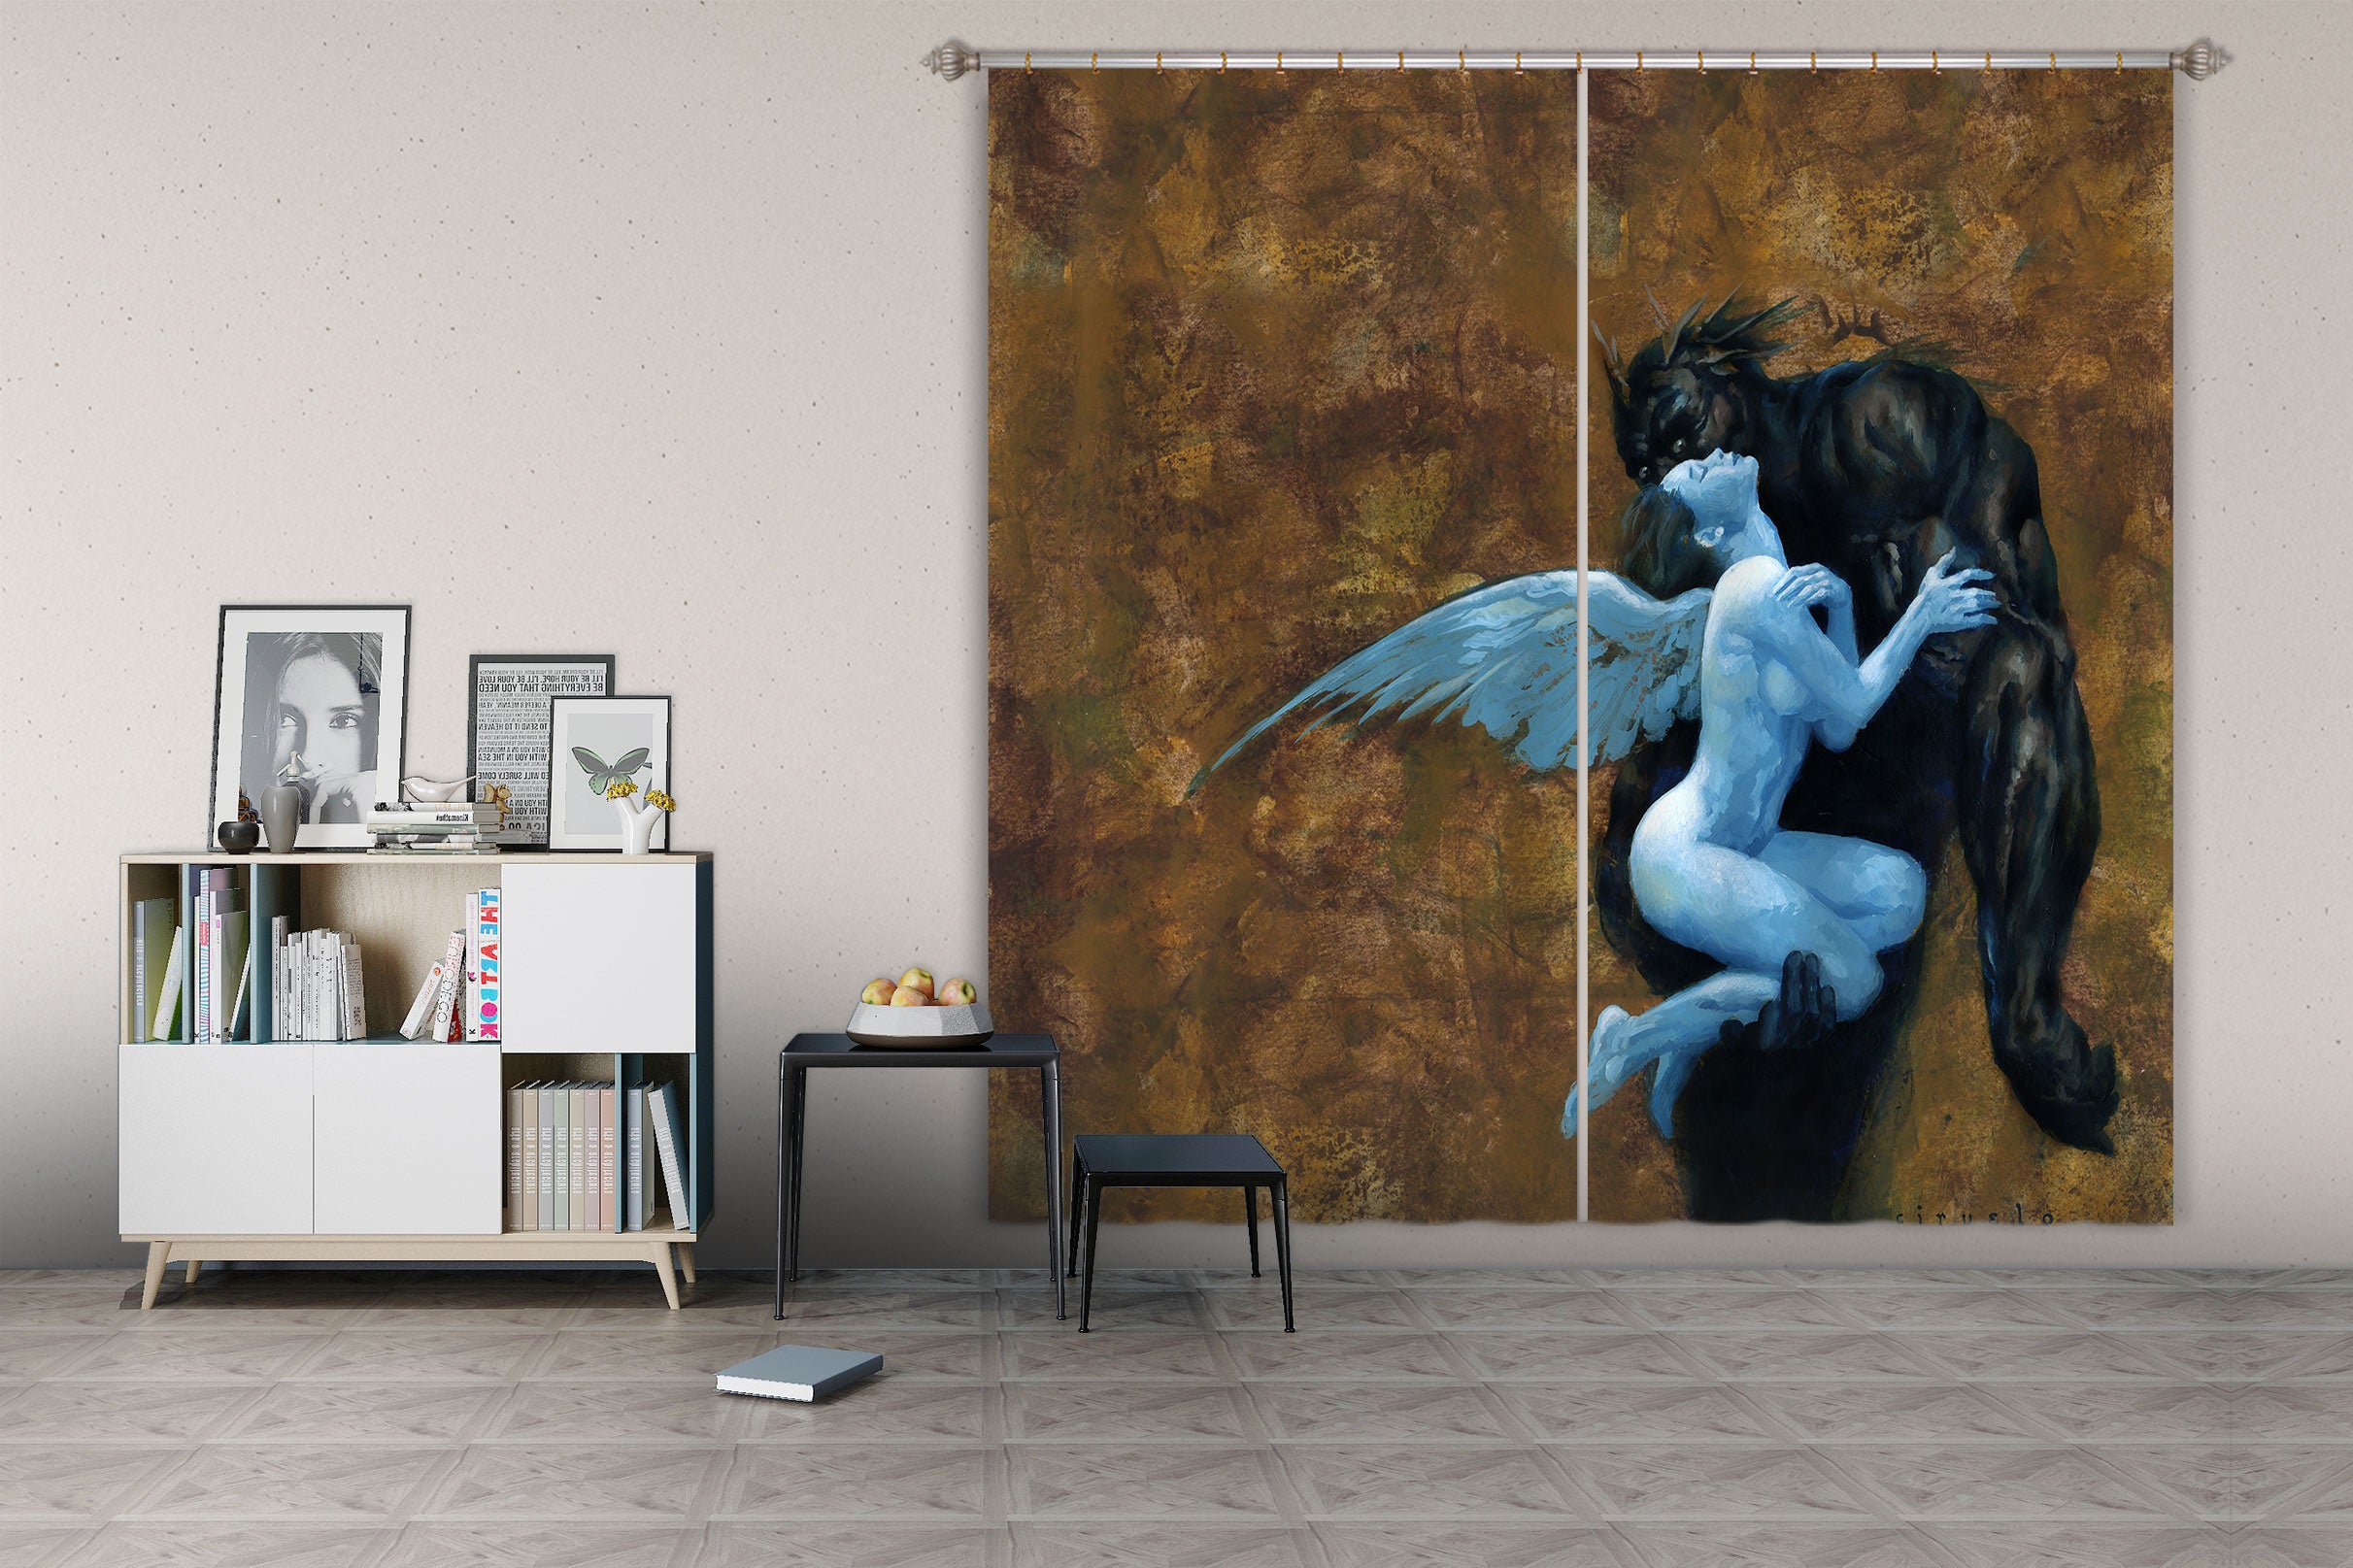 3D Winged Woman Monster 7191 Ciruelo Curtain Curtains Drapes